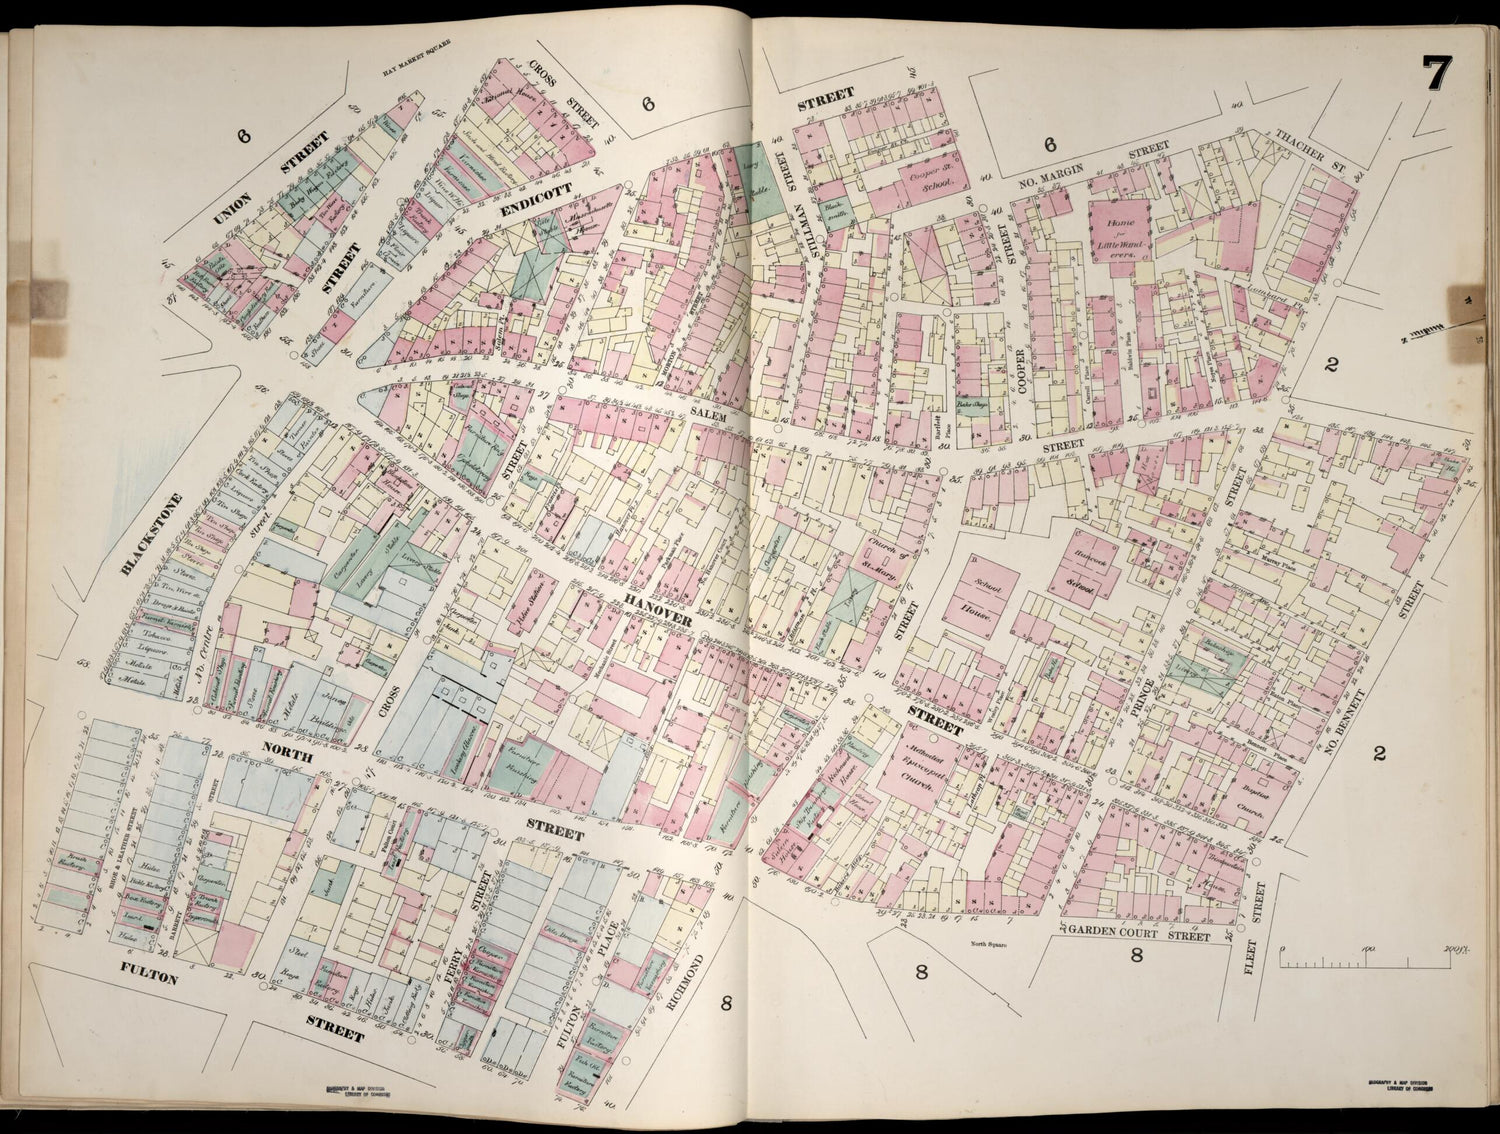 This old map of Image 8 of Boston from Insurance Map of Boston. Volume 1 from 1867 was created by D. A. (Daniel Alfred) Sanborn in 1867